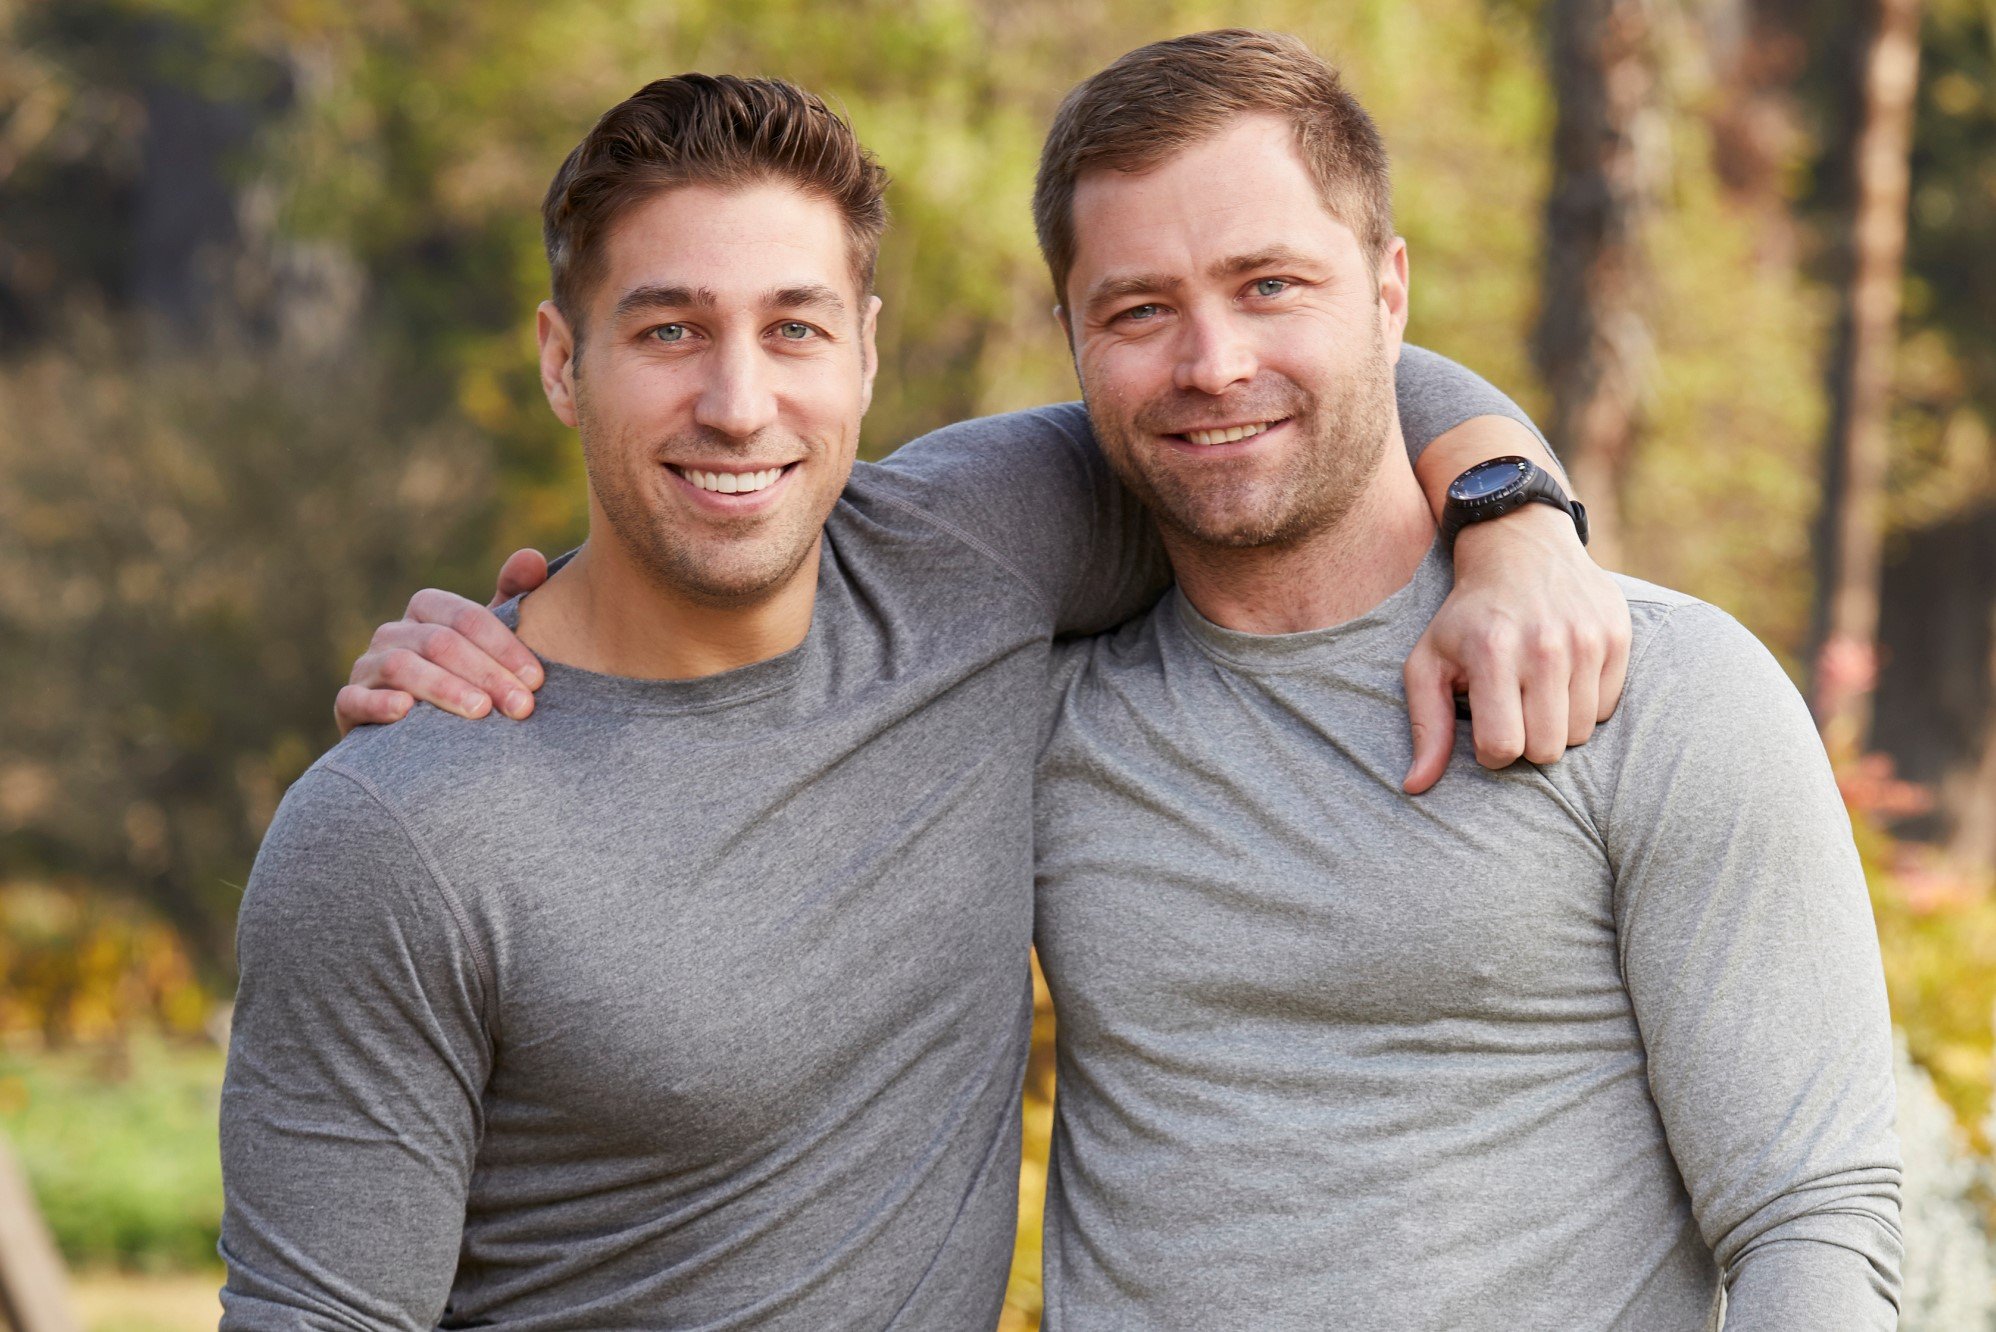 'The Amazing Race' Season 33 contestants Ryan Ferguson and Dusty Harris wear gray long-sleeved shirts and wrap their arms around one another while posing for promotional pictures.